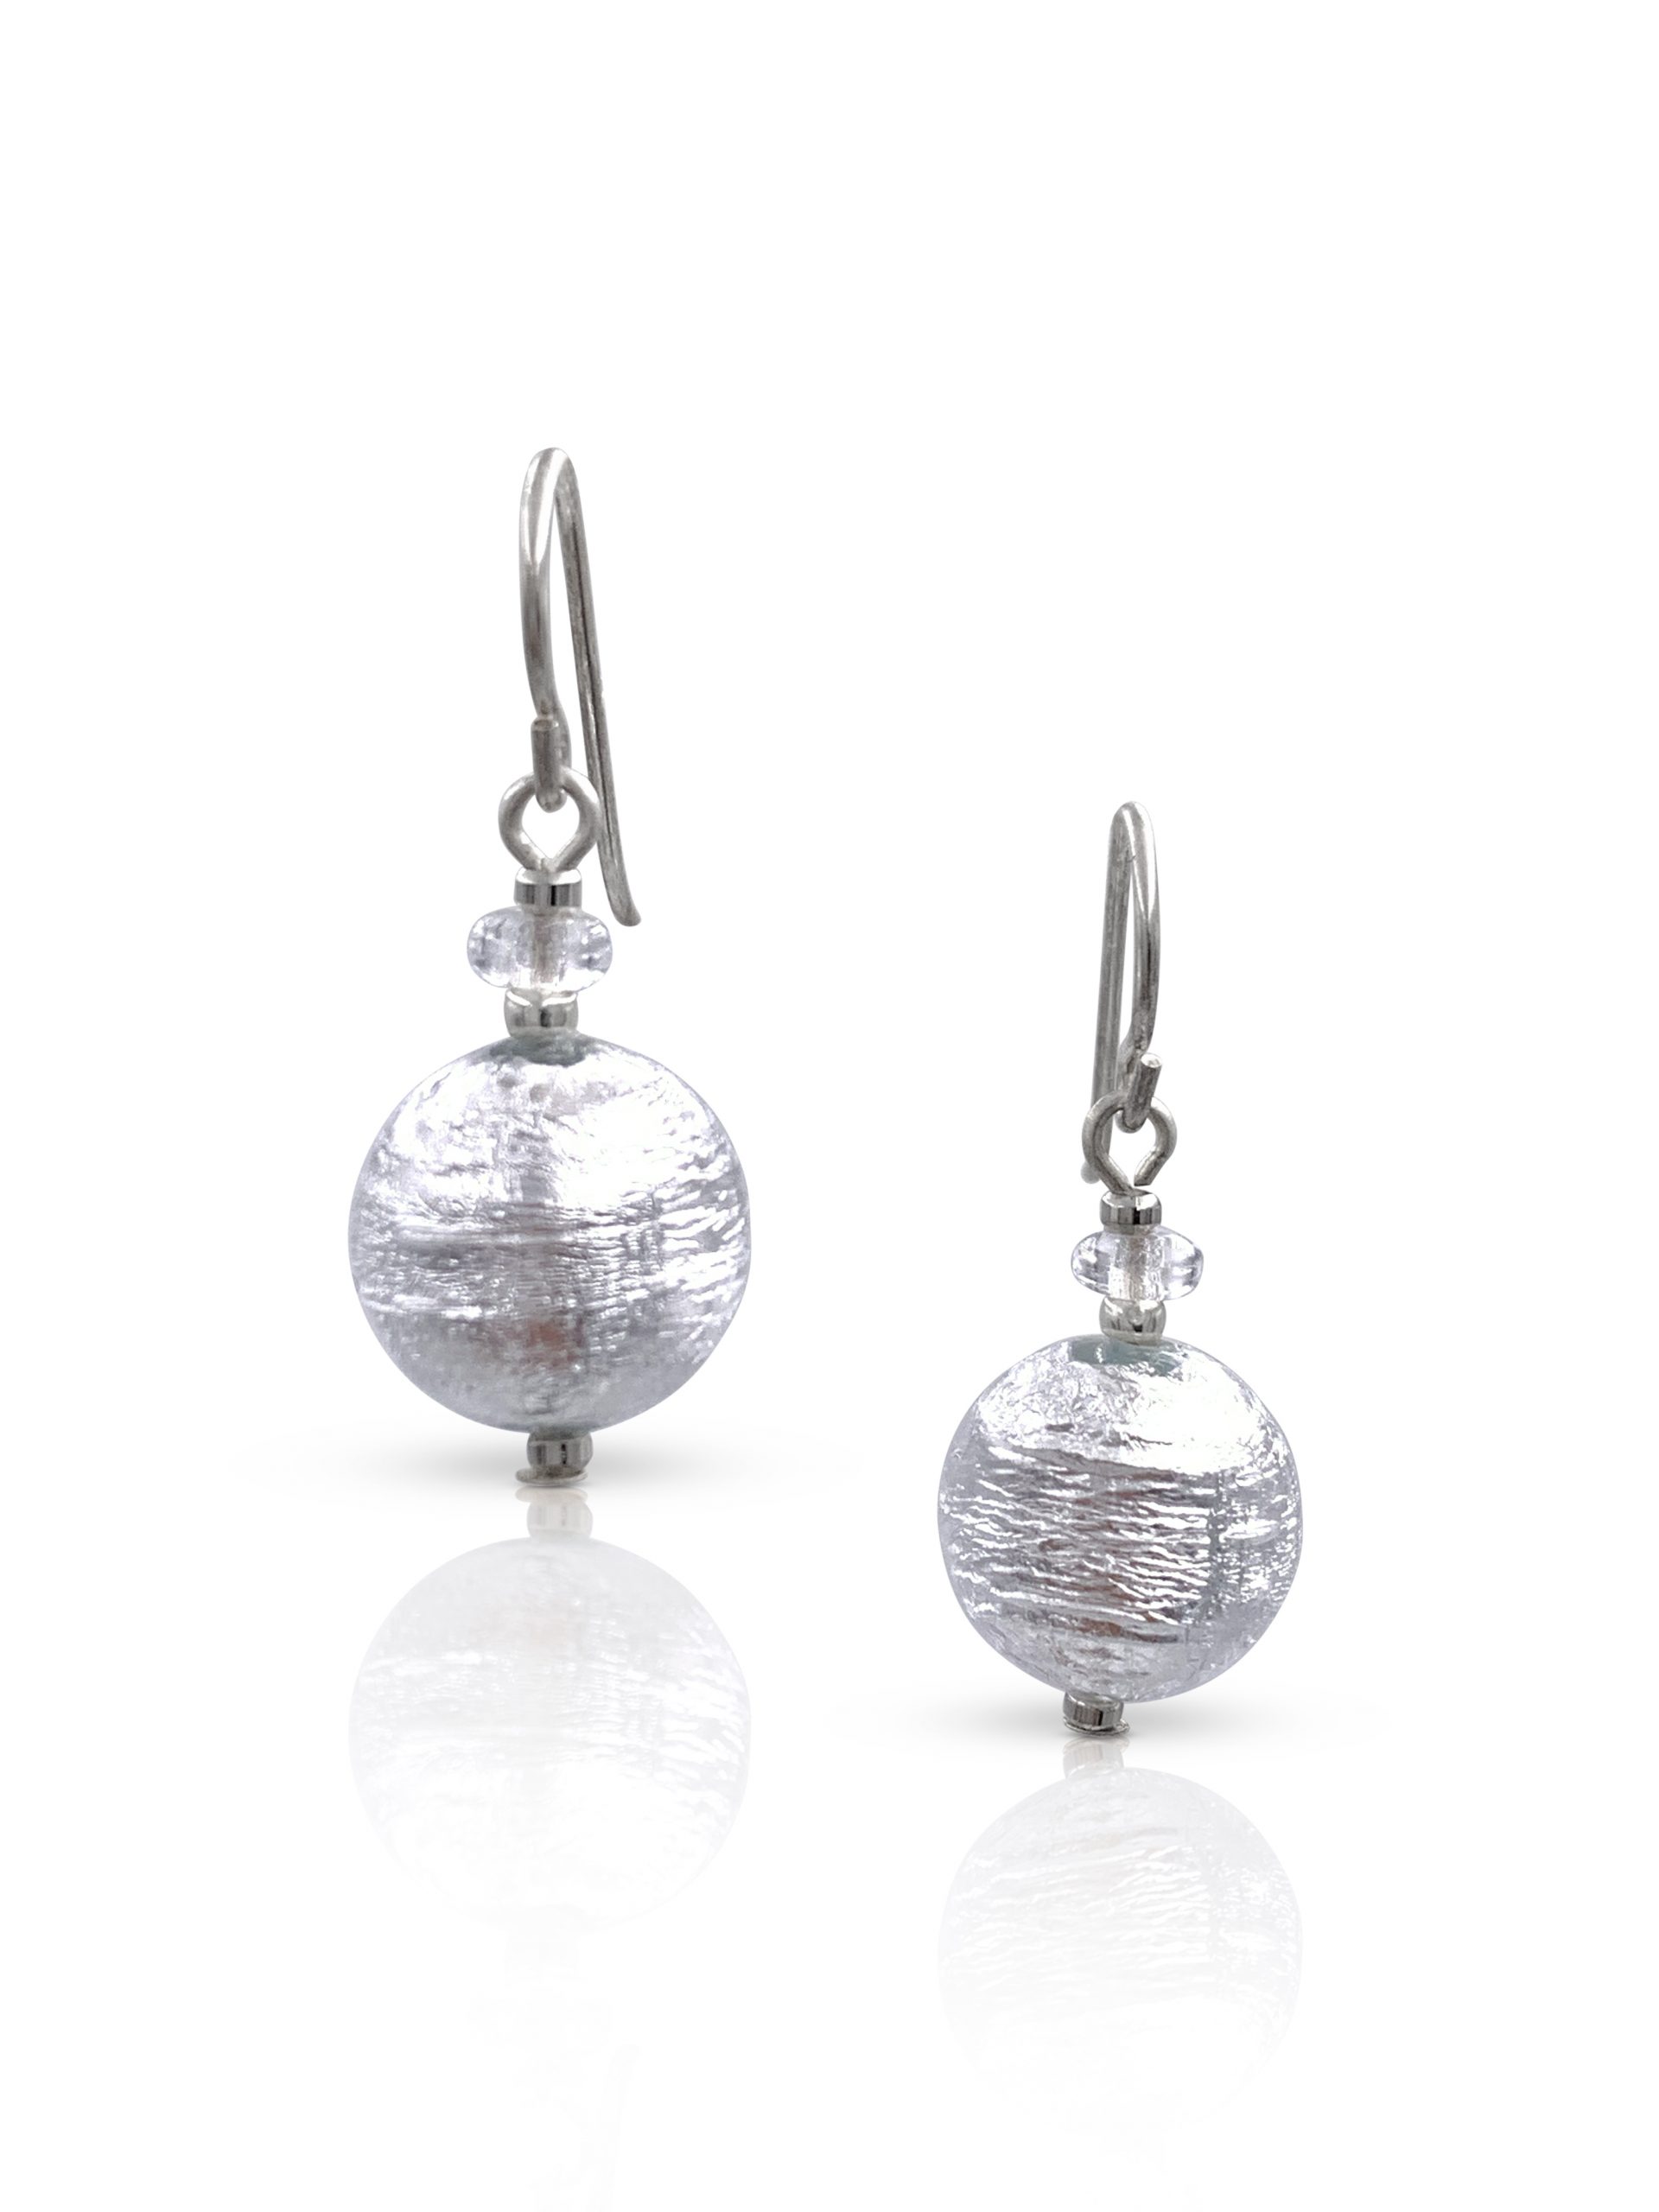 Amazon.com: Murano Glass Earrings Queen's Jewel in Gold Silver and Black by  I Love Murano : Handmade Products